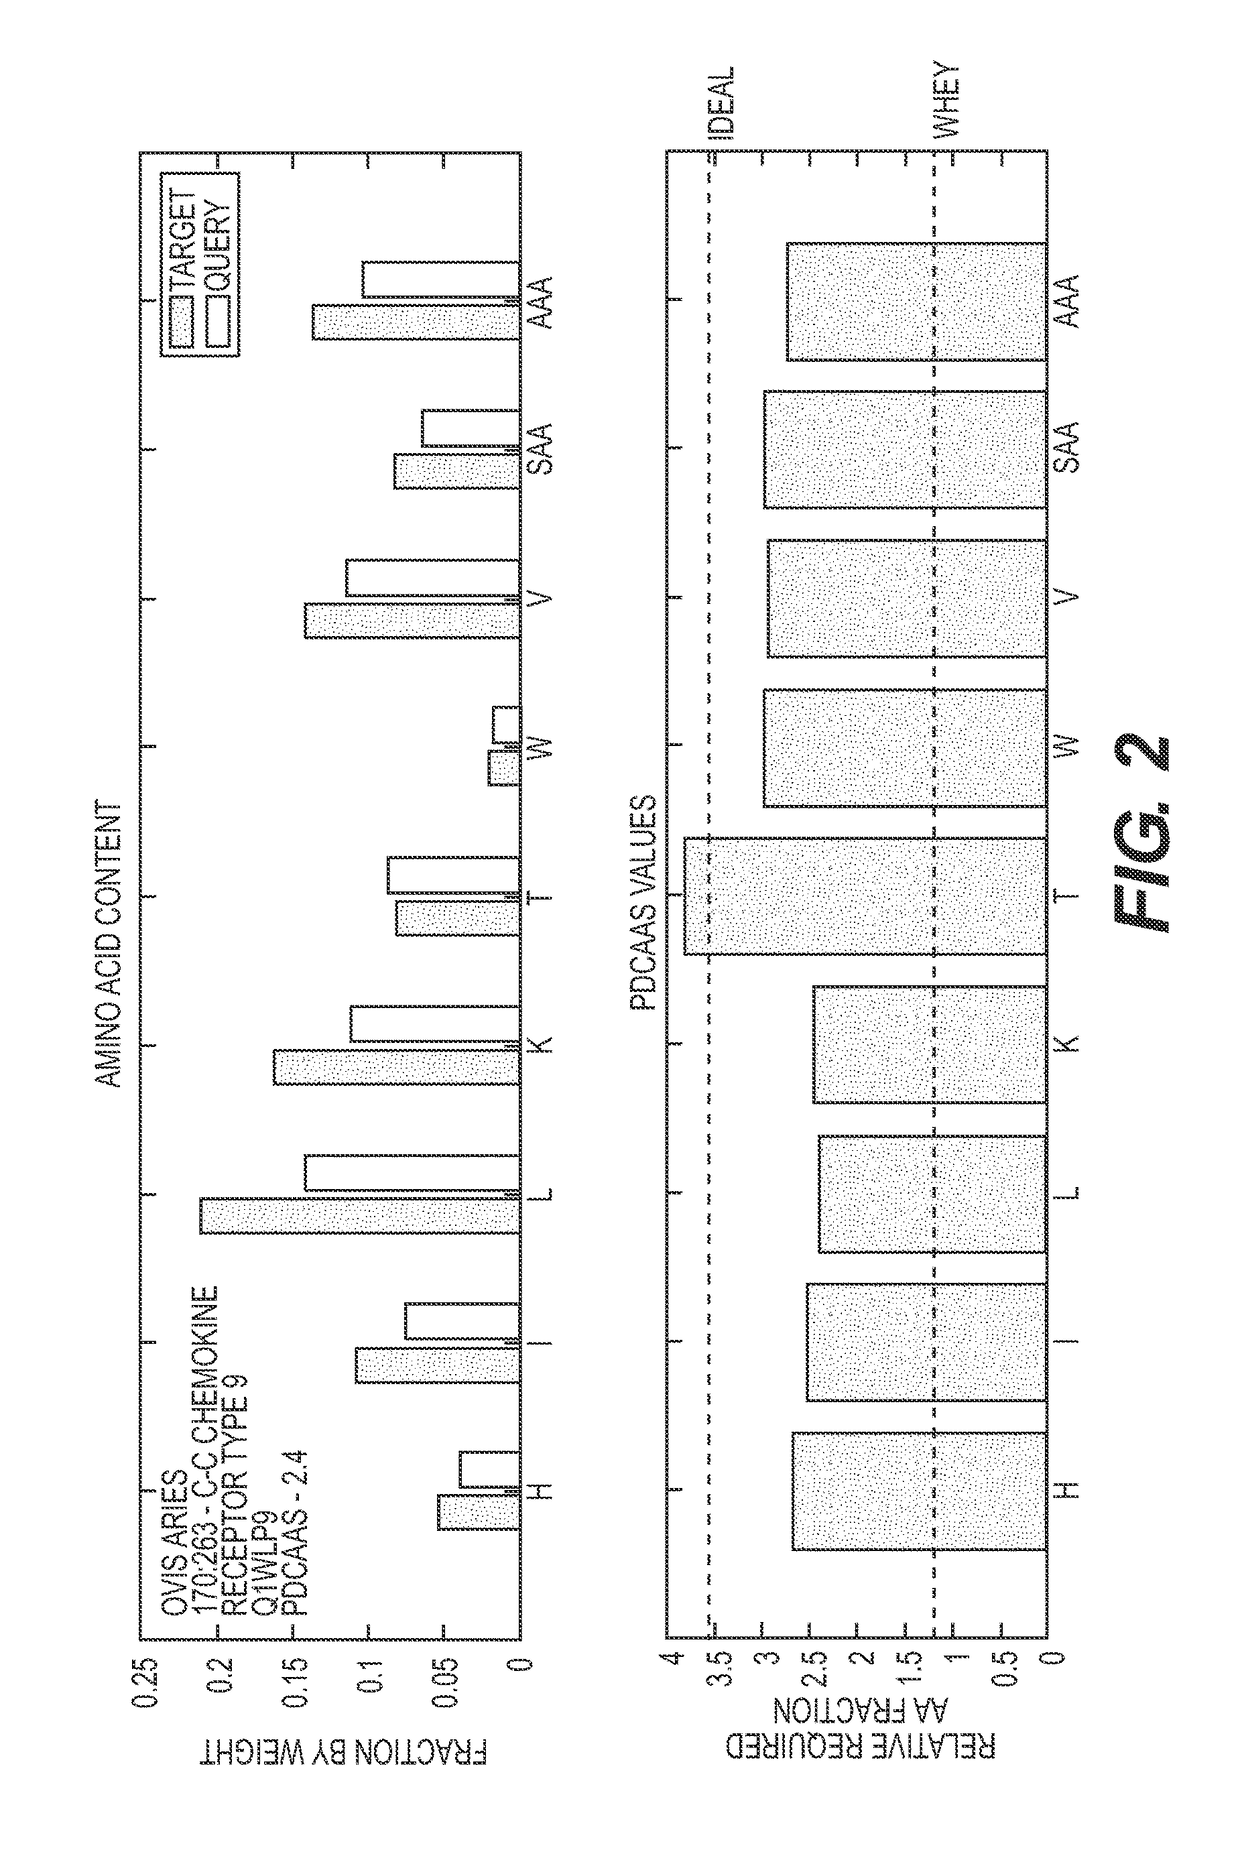 Nutritive fragments, proteins and methods